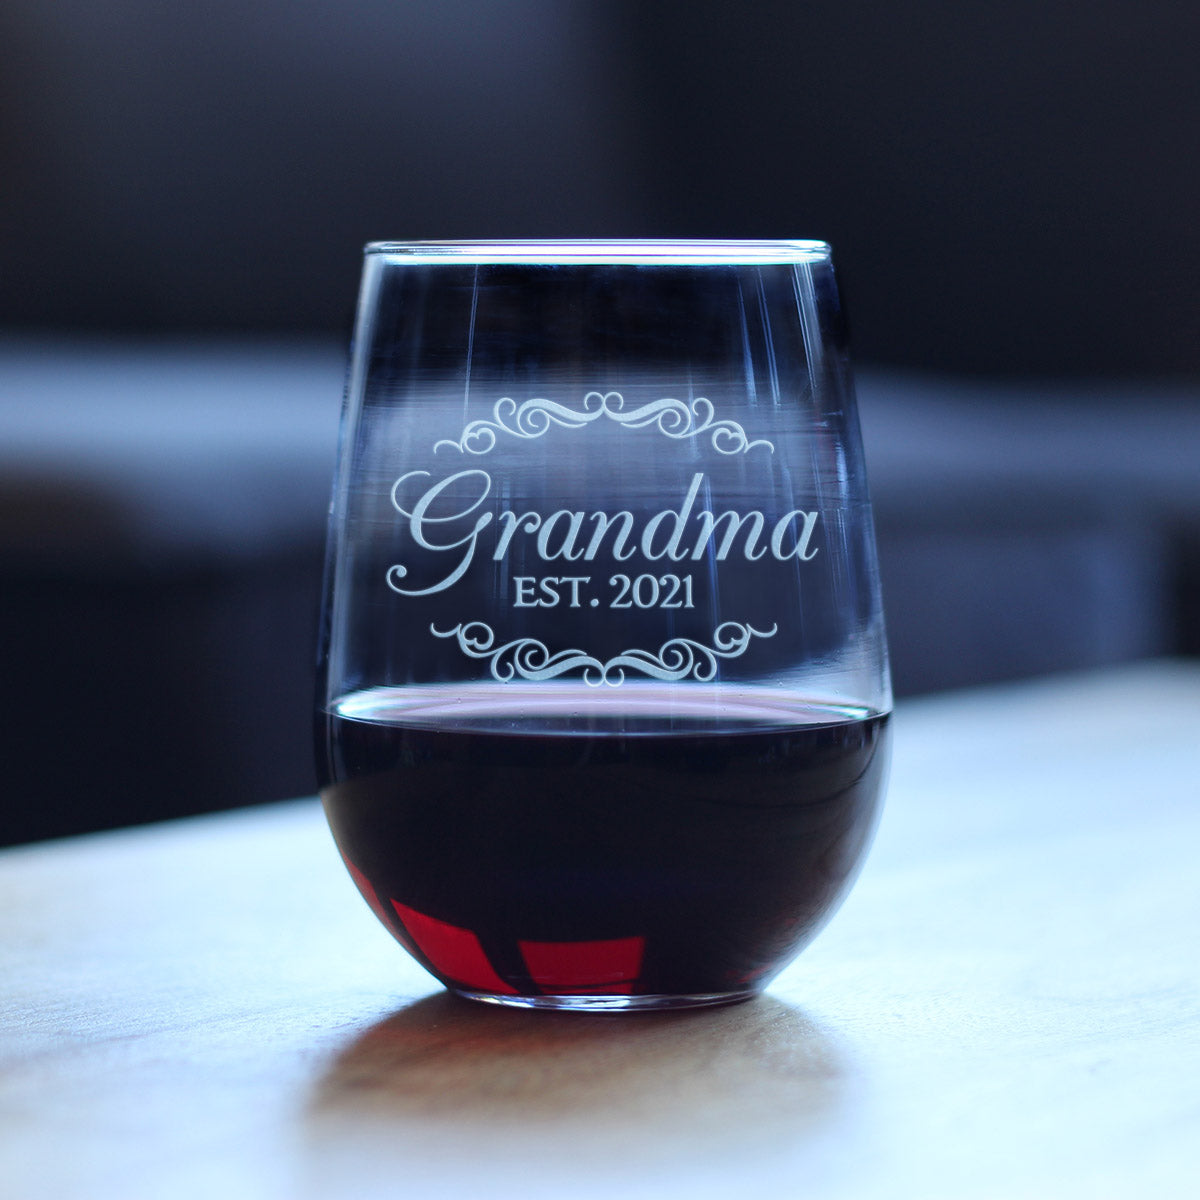 Grandma Est 2021 - New Grandmother Stemless Wine Glass Gift for First Time Grandparents - Decorative 17 Oz Large Glasses